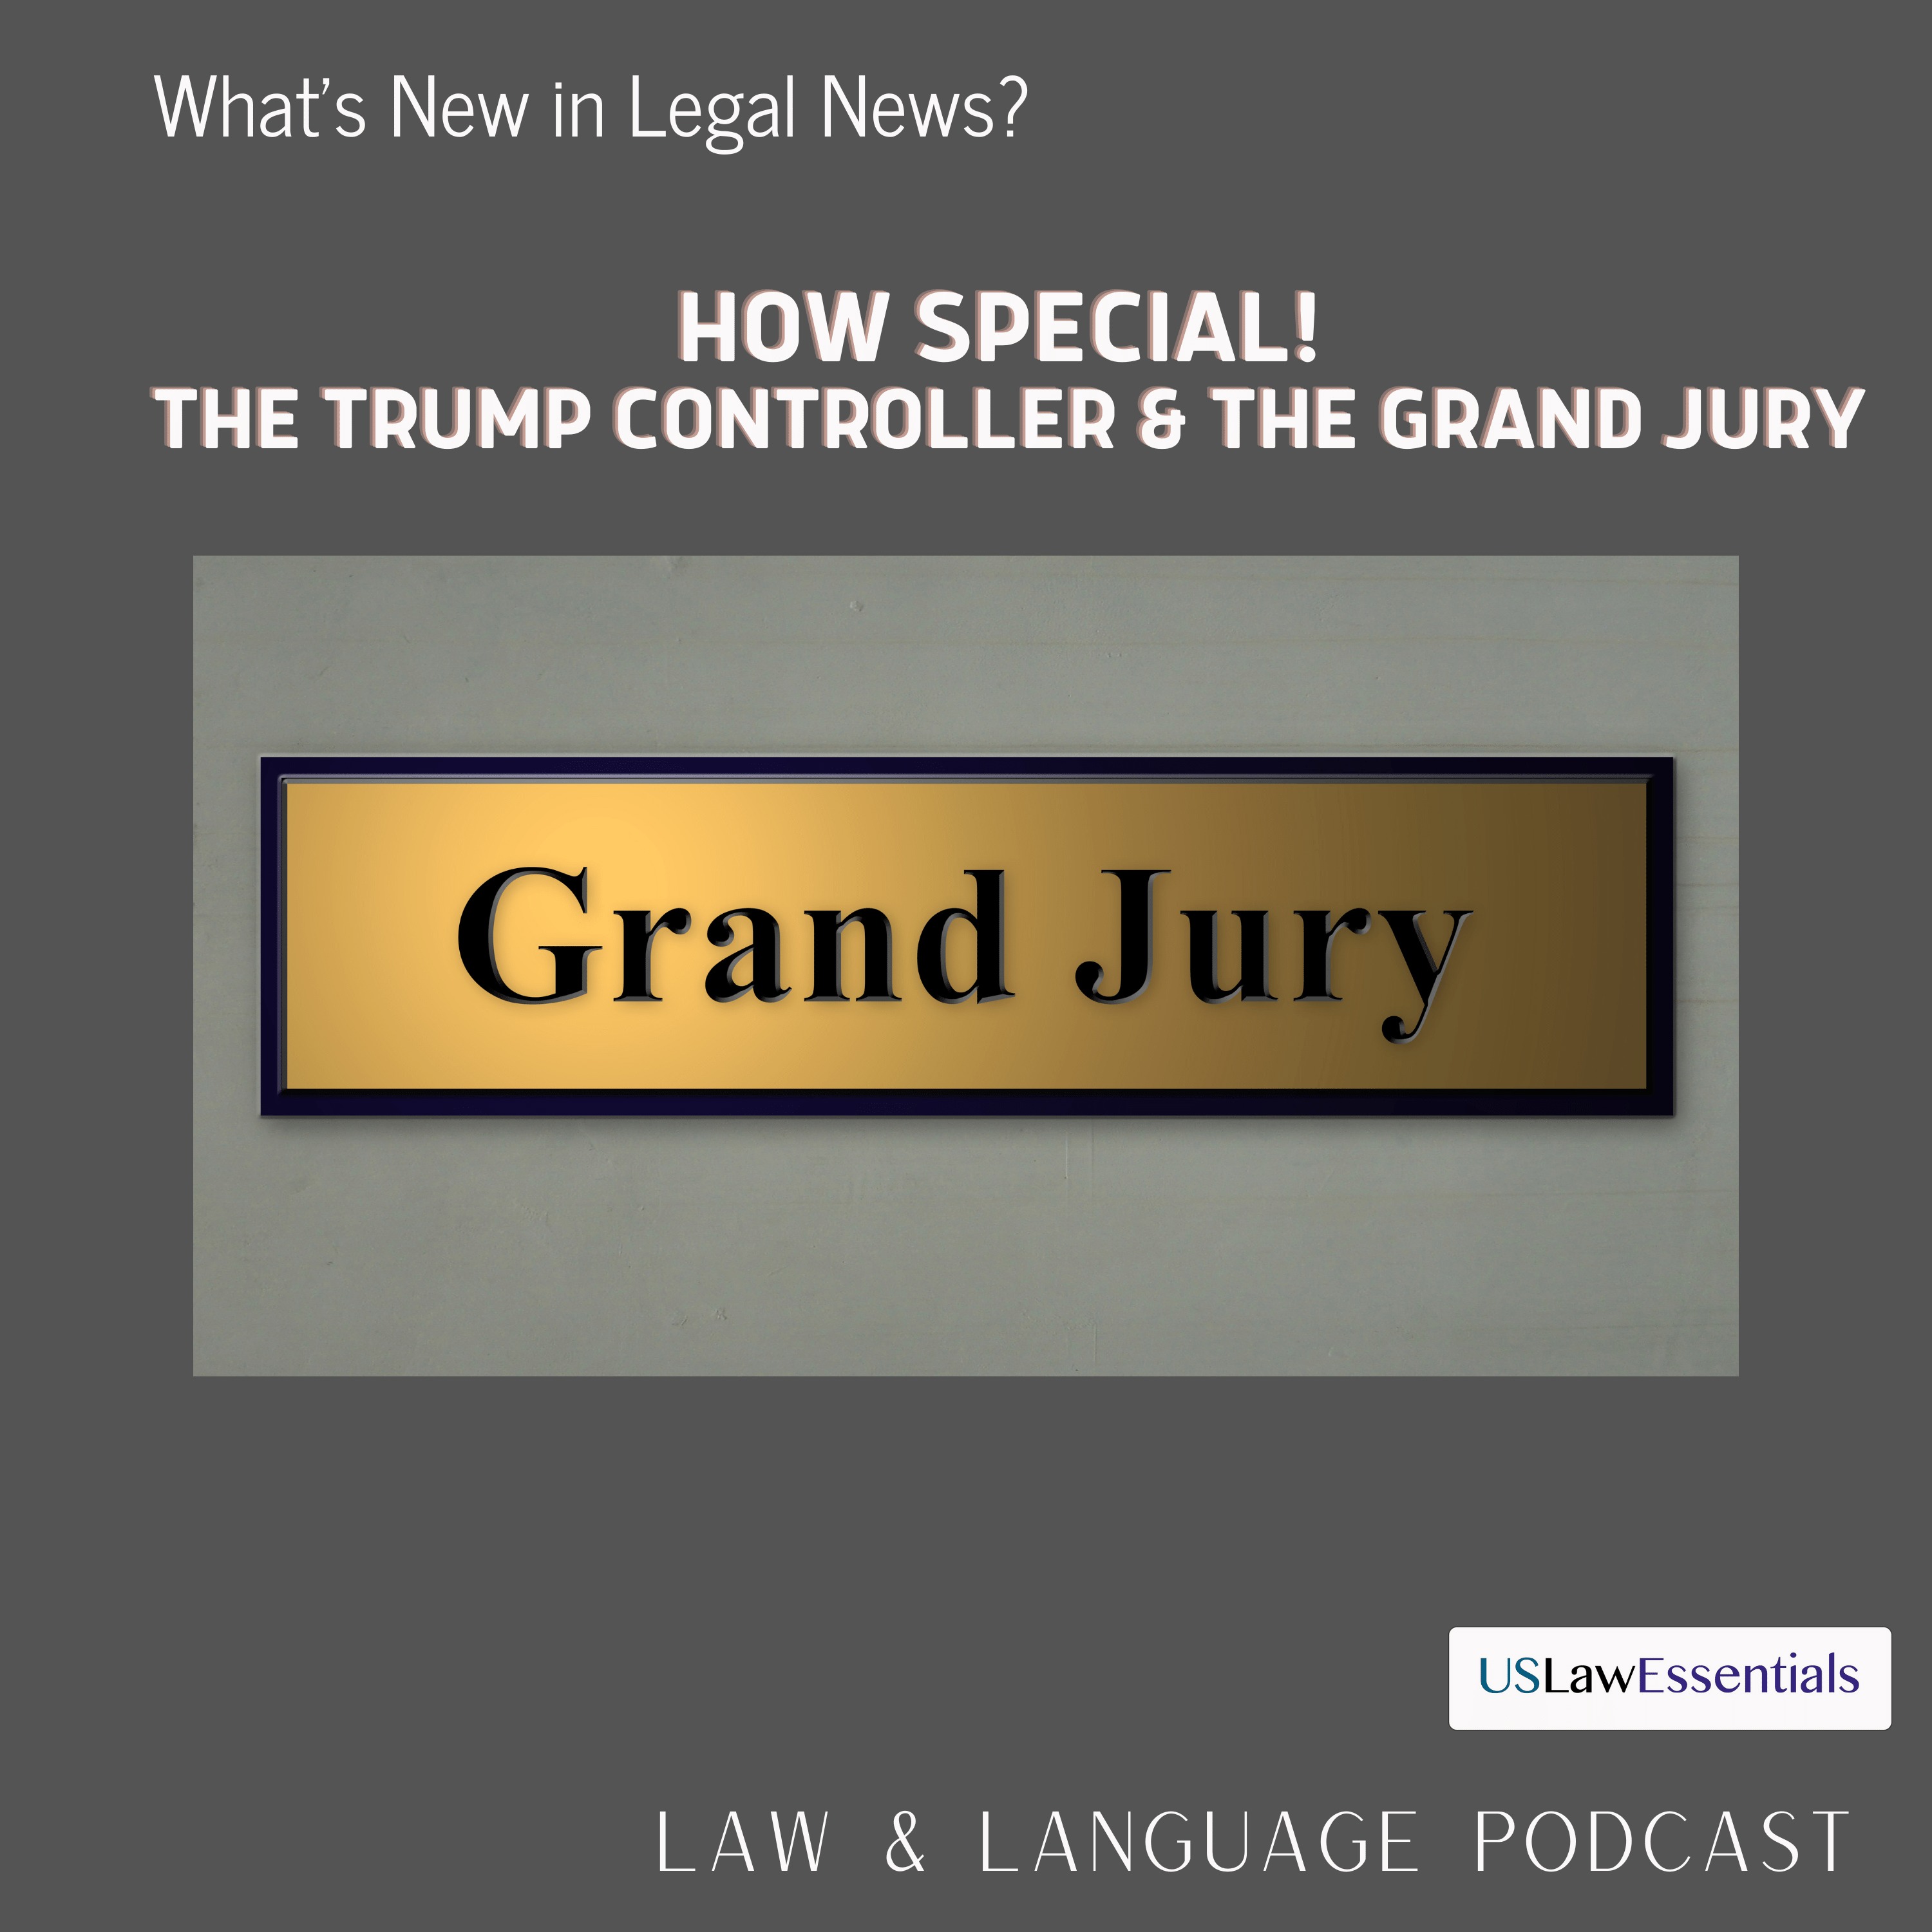 How Special! The Trump Controller & the Grand Jury